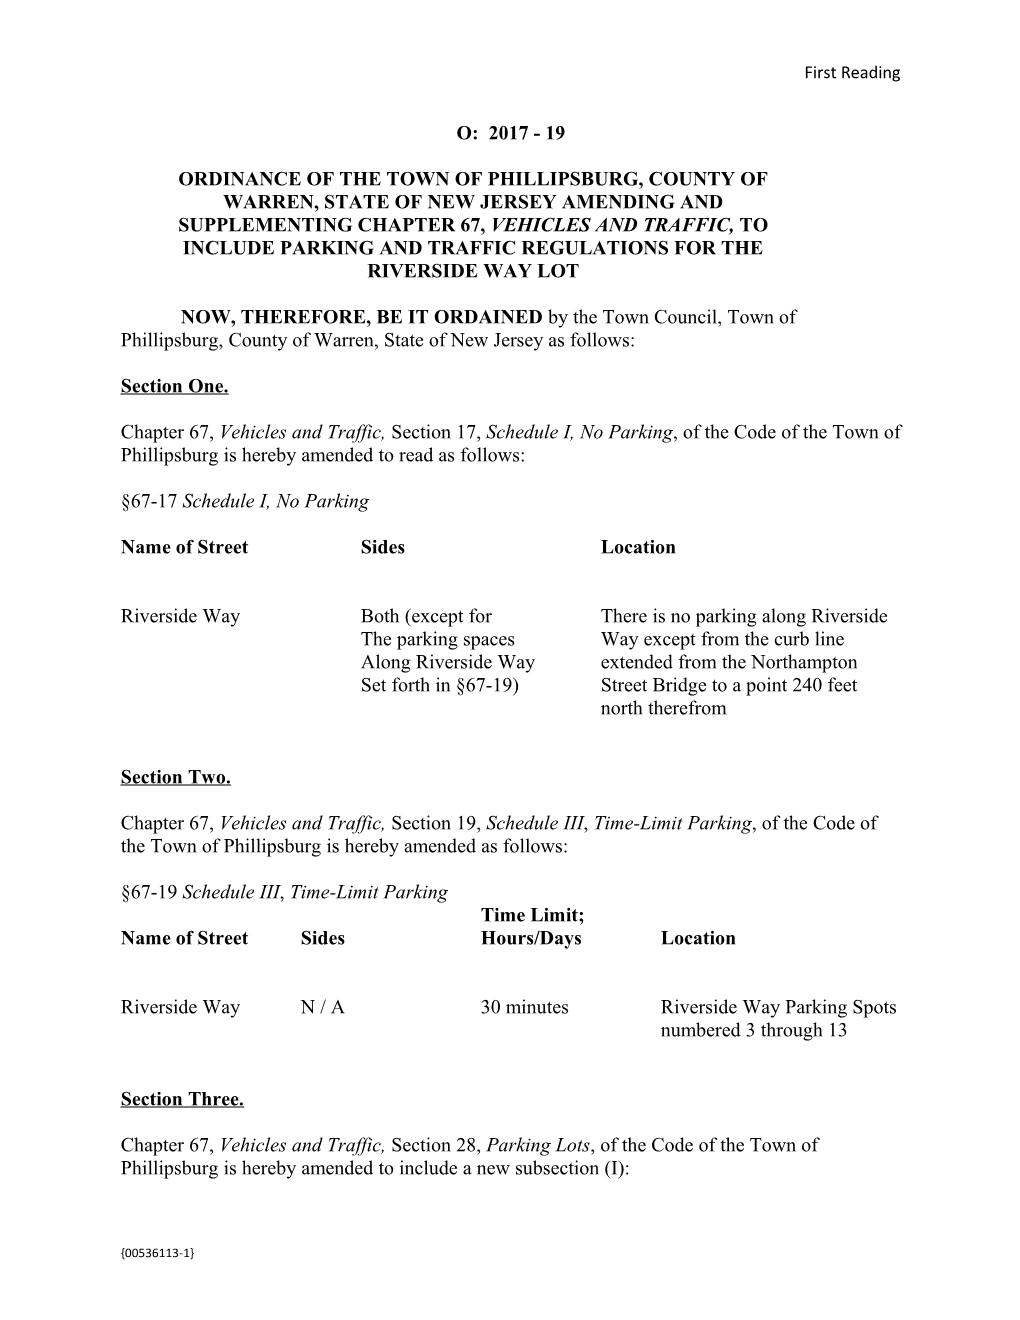 Ordinance of the Town of Phillipsburg, County of Warren, State of New Jersey Amending